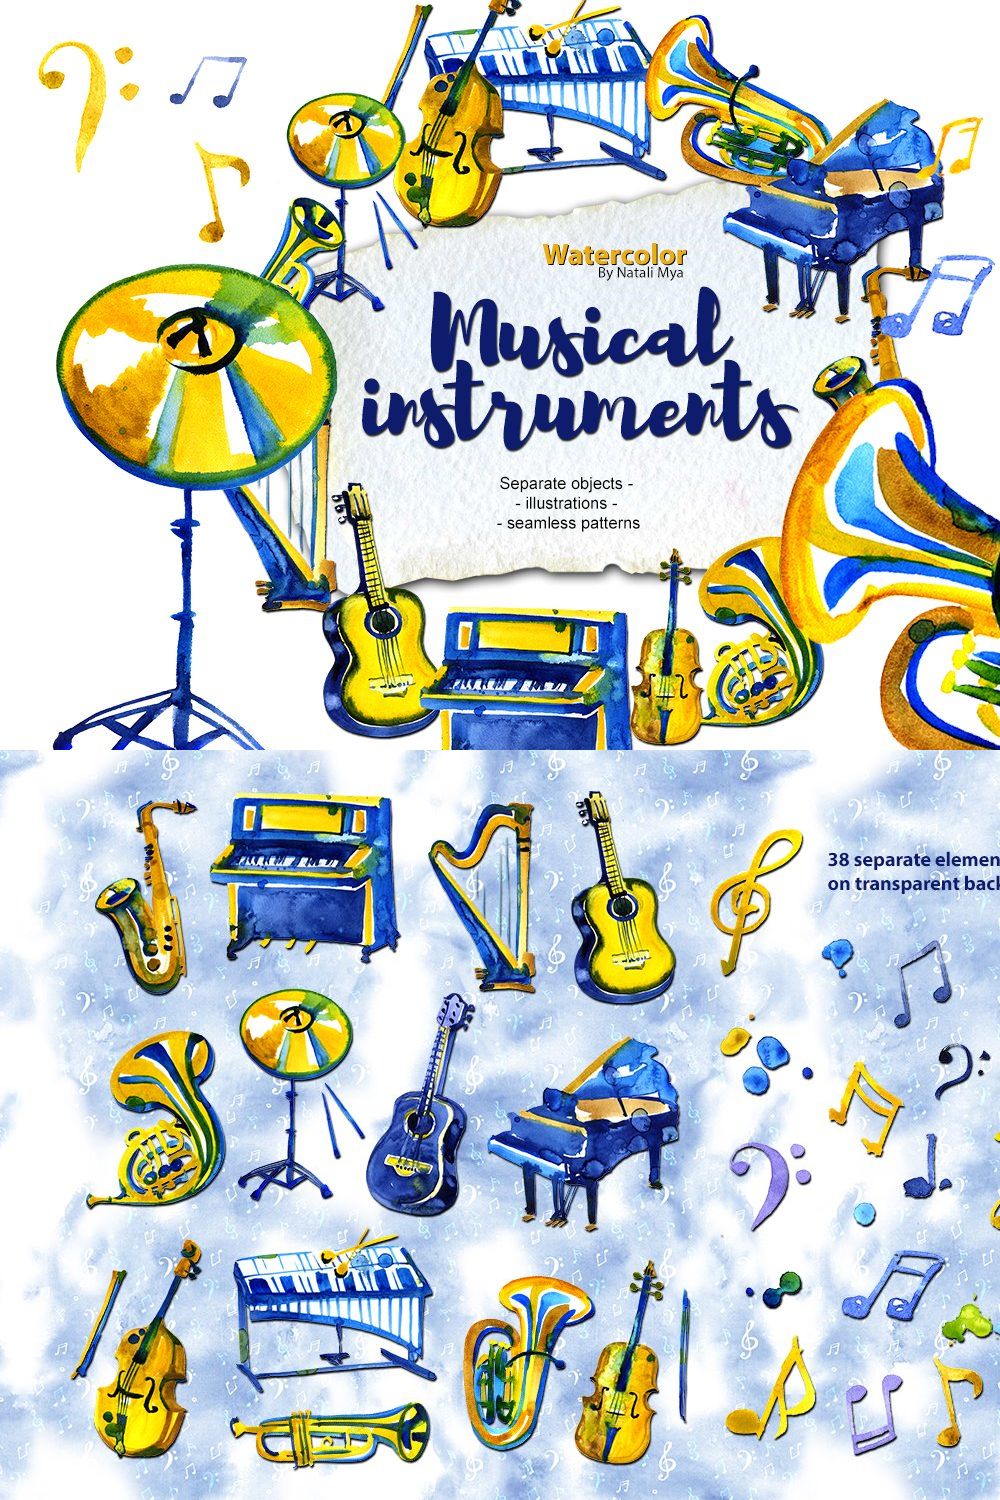 Watercolor musical instruments set pinterest preview image.